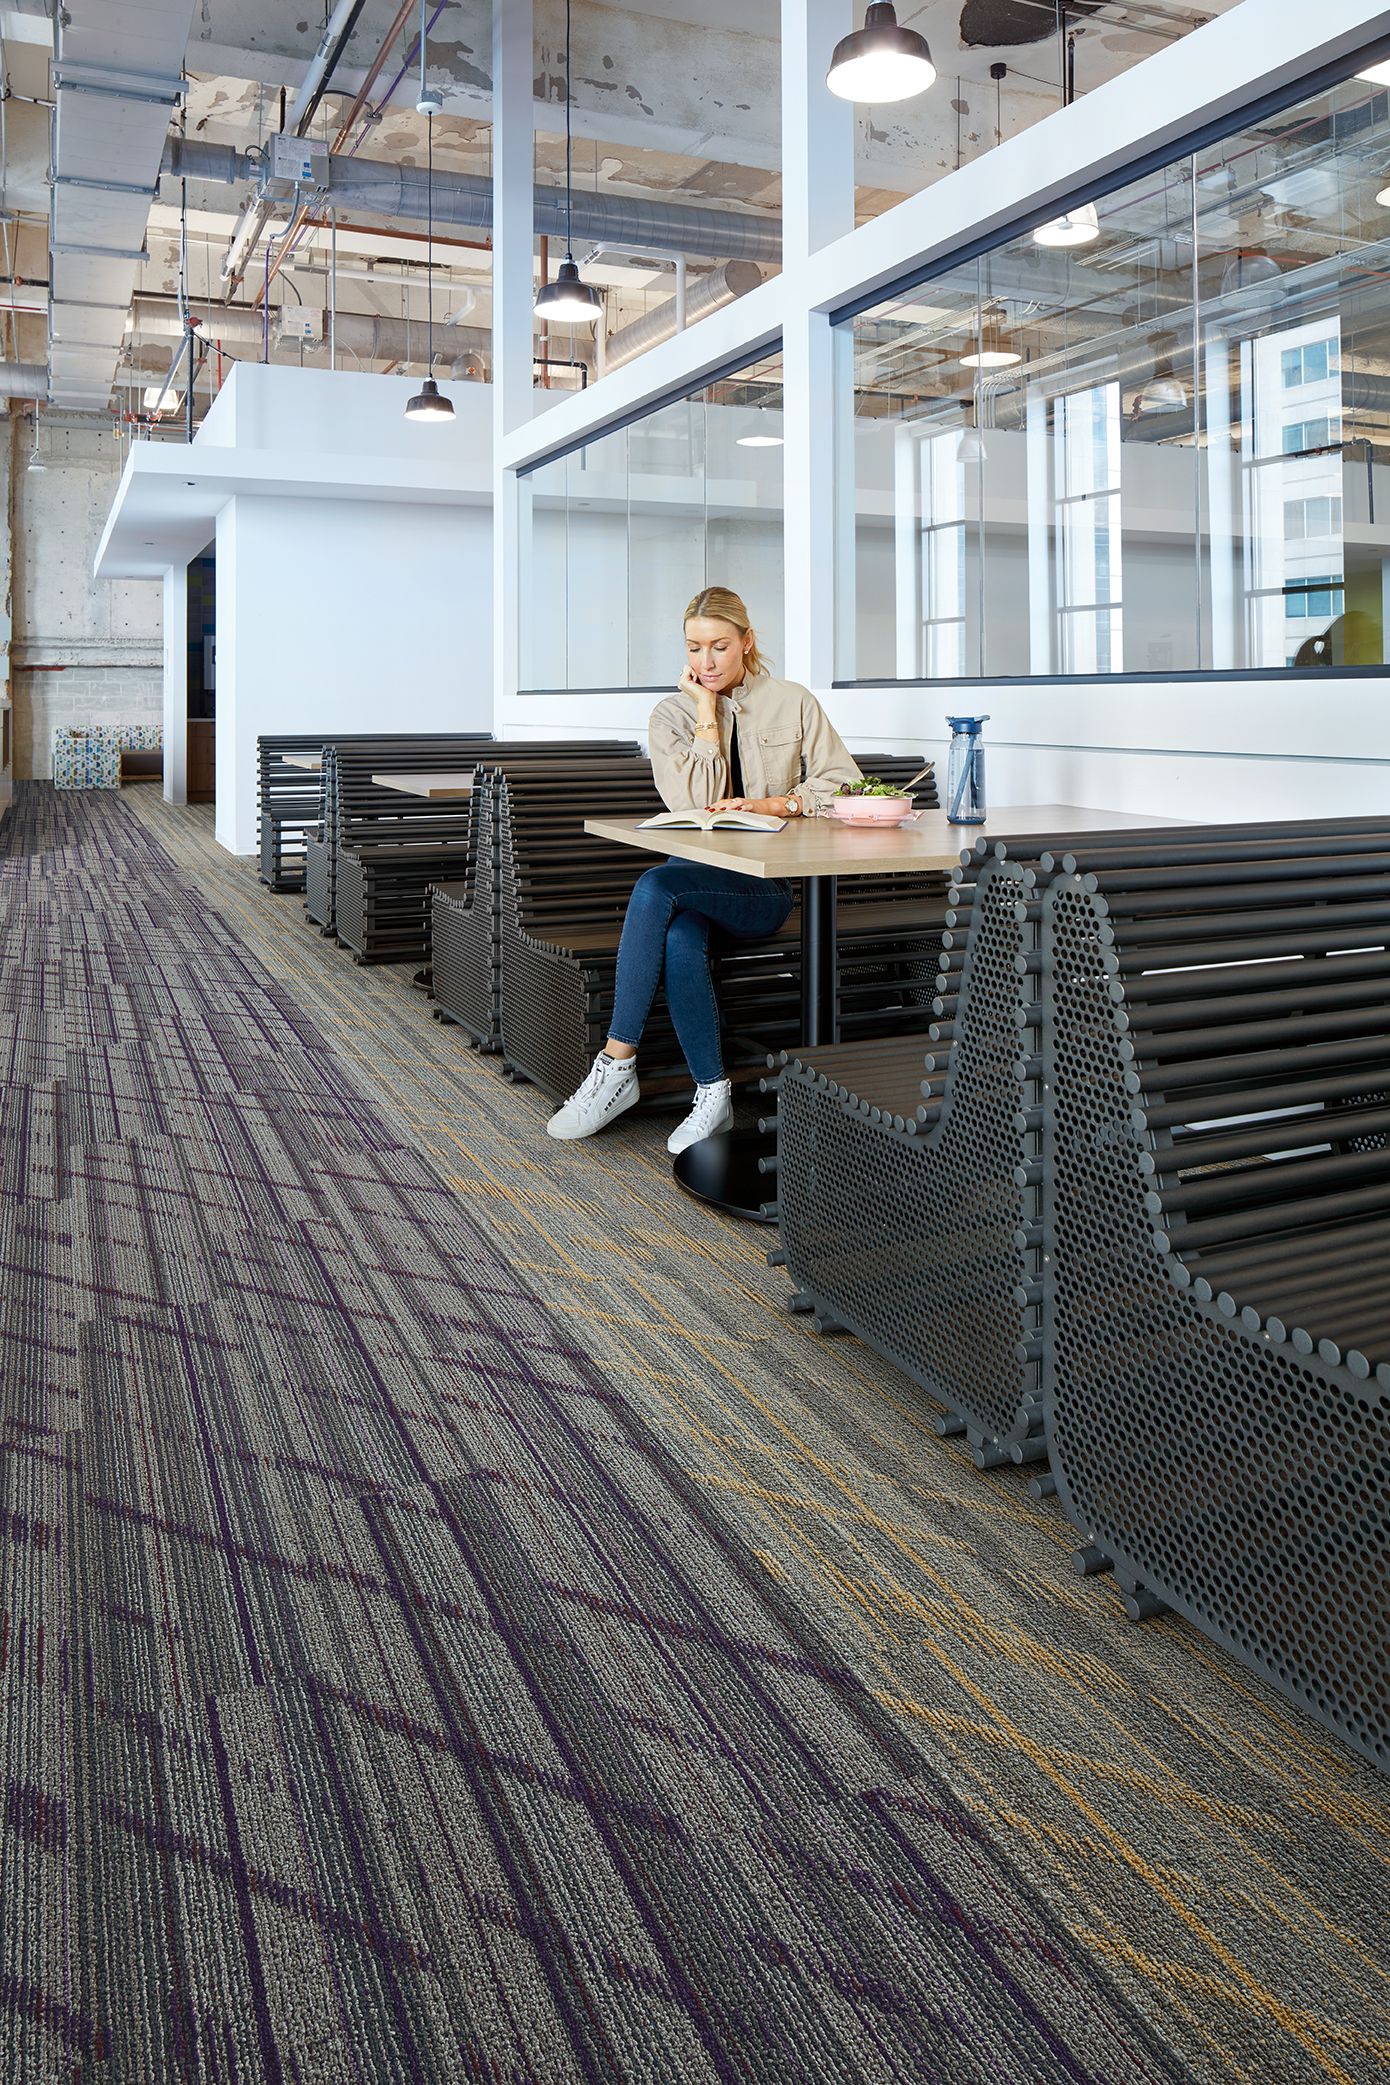 Interface Luminescent plank carpet tile in cafe area with woman seated at table imagen número 1